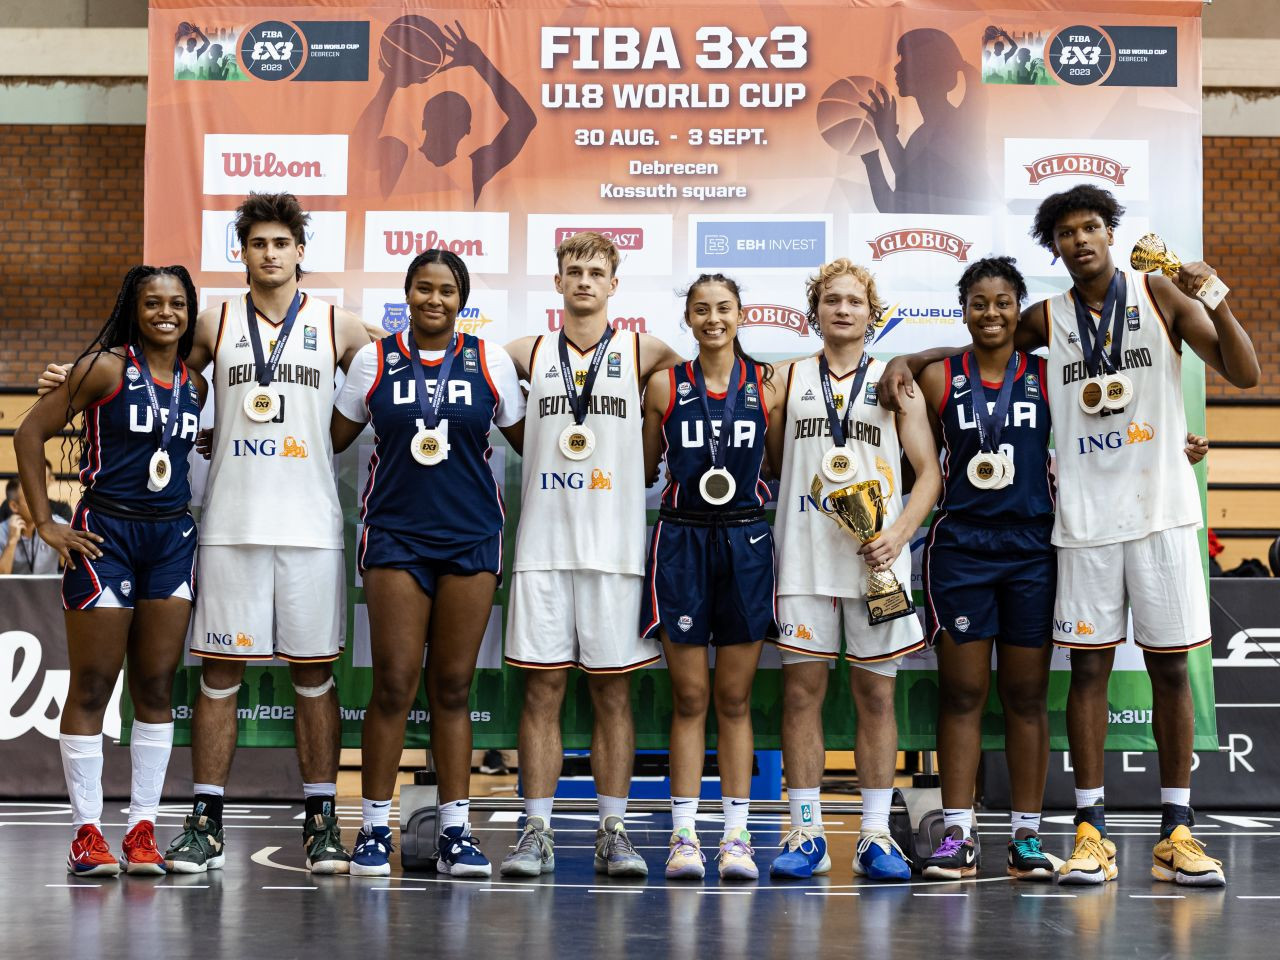 Germany and the United States take FIBA 3x3 U18 World Cup titles in Hungary